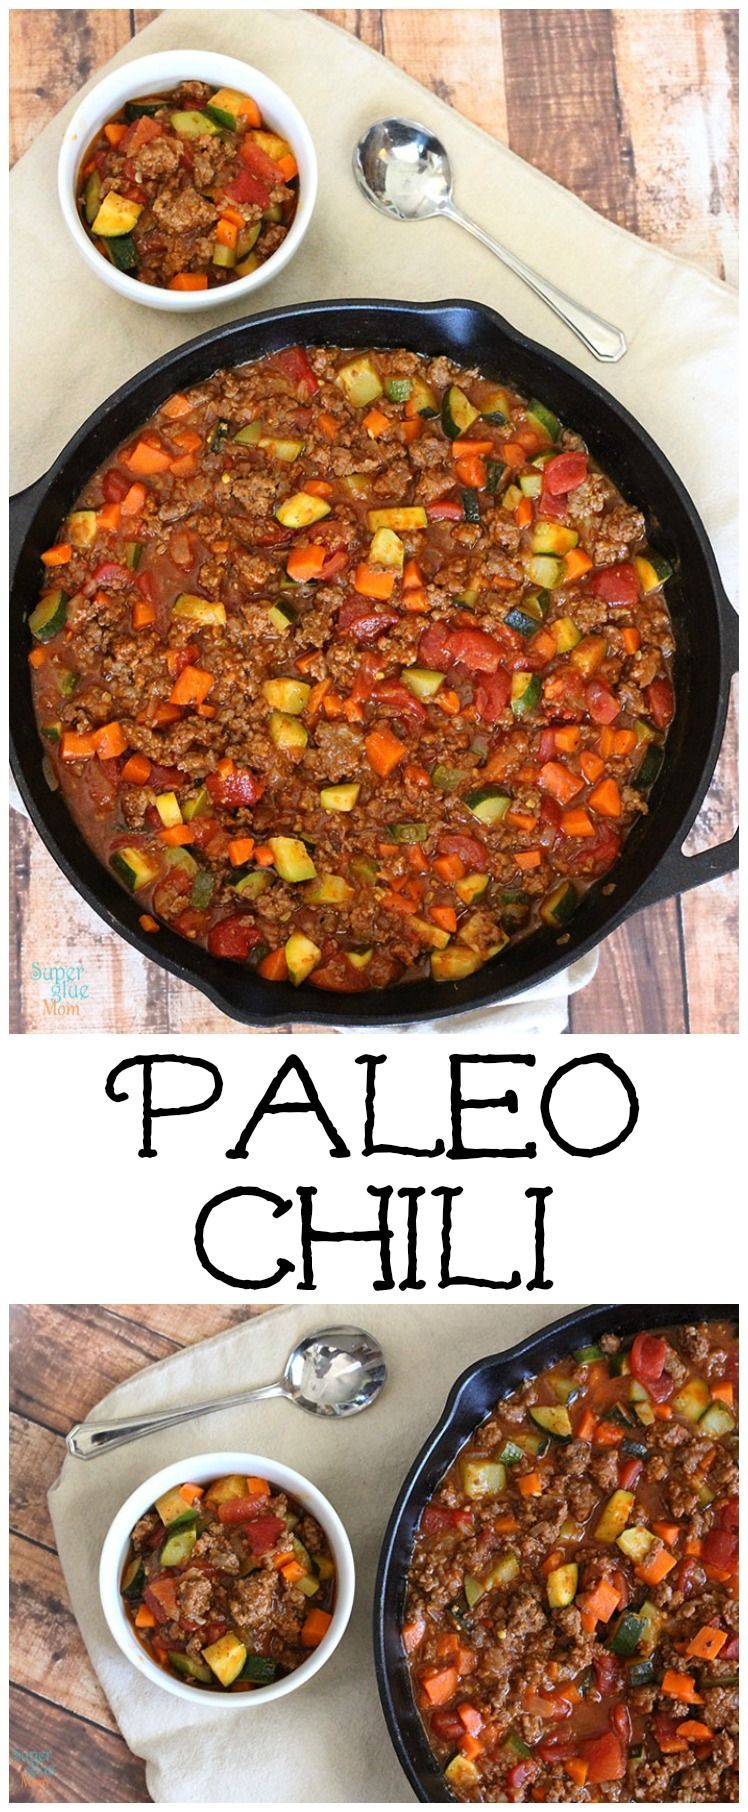 This paleo chili recipe is even better than the traditional kind. Its hearty,